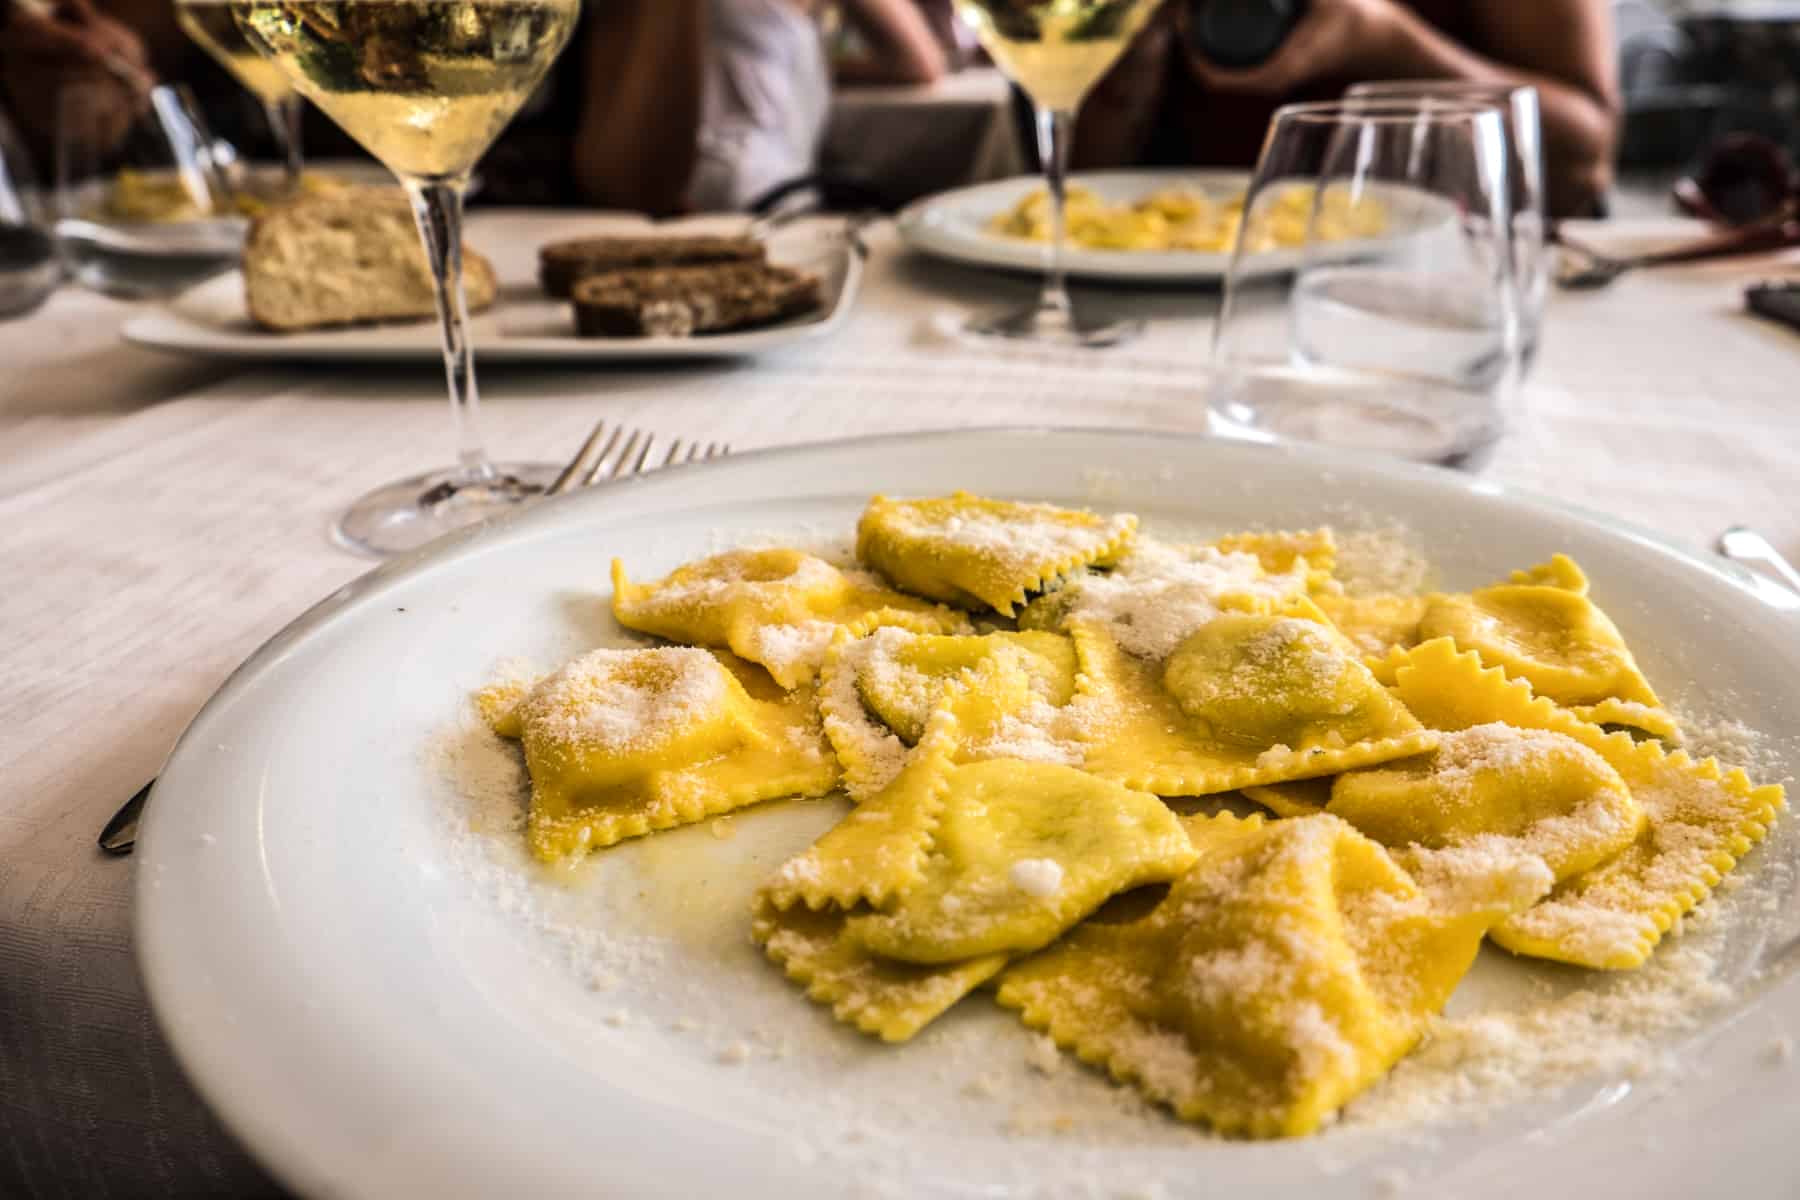 Fresh egg yellow Ravioli pasta served on a white plate with a glass of white wine in the Emilia Romagna food region in northern Italy.